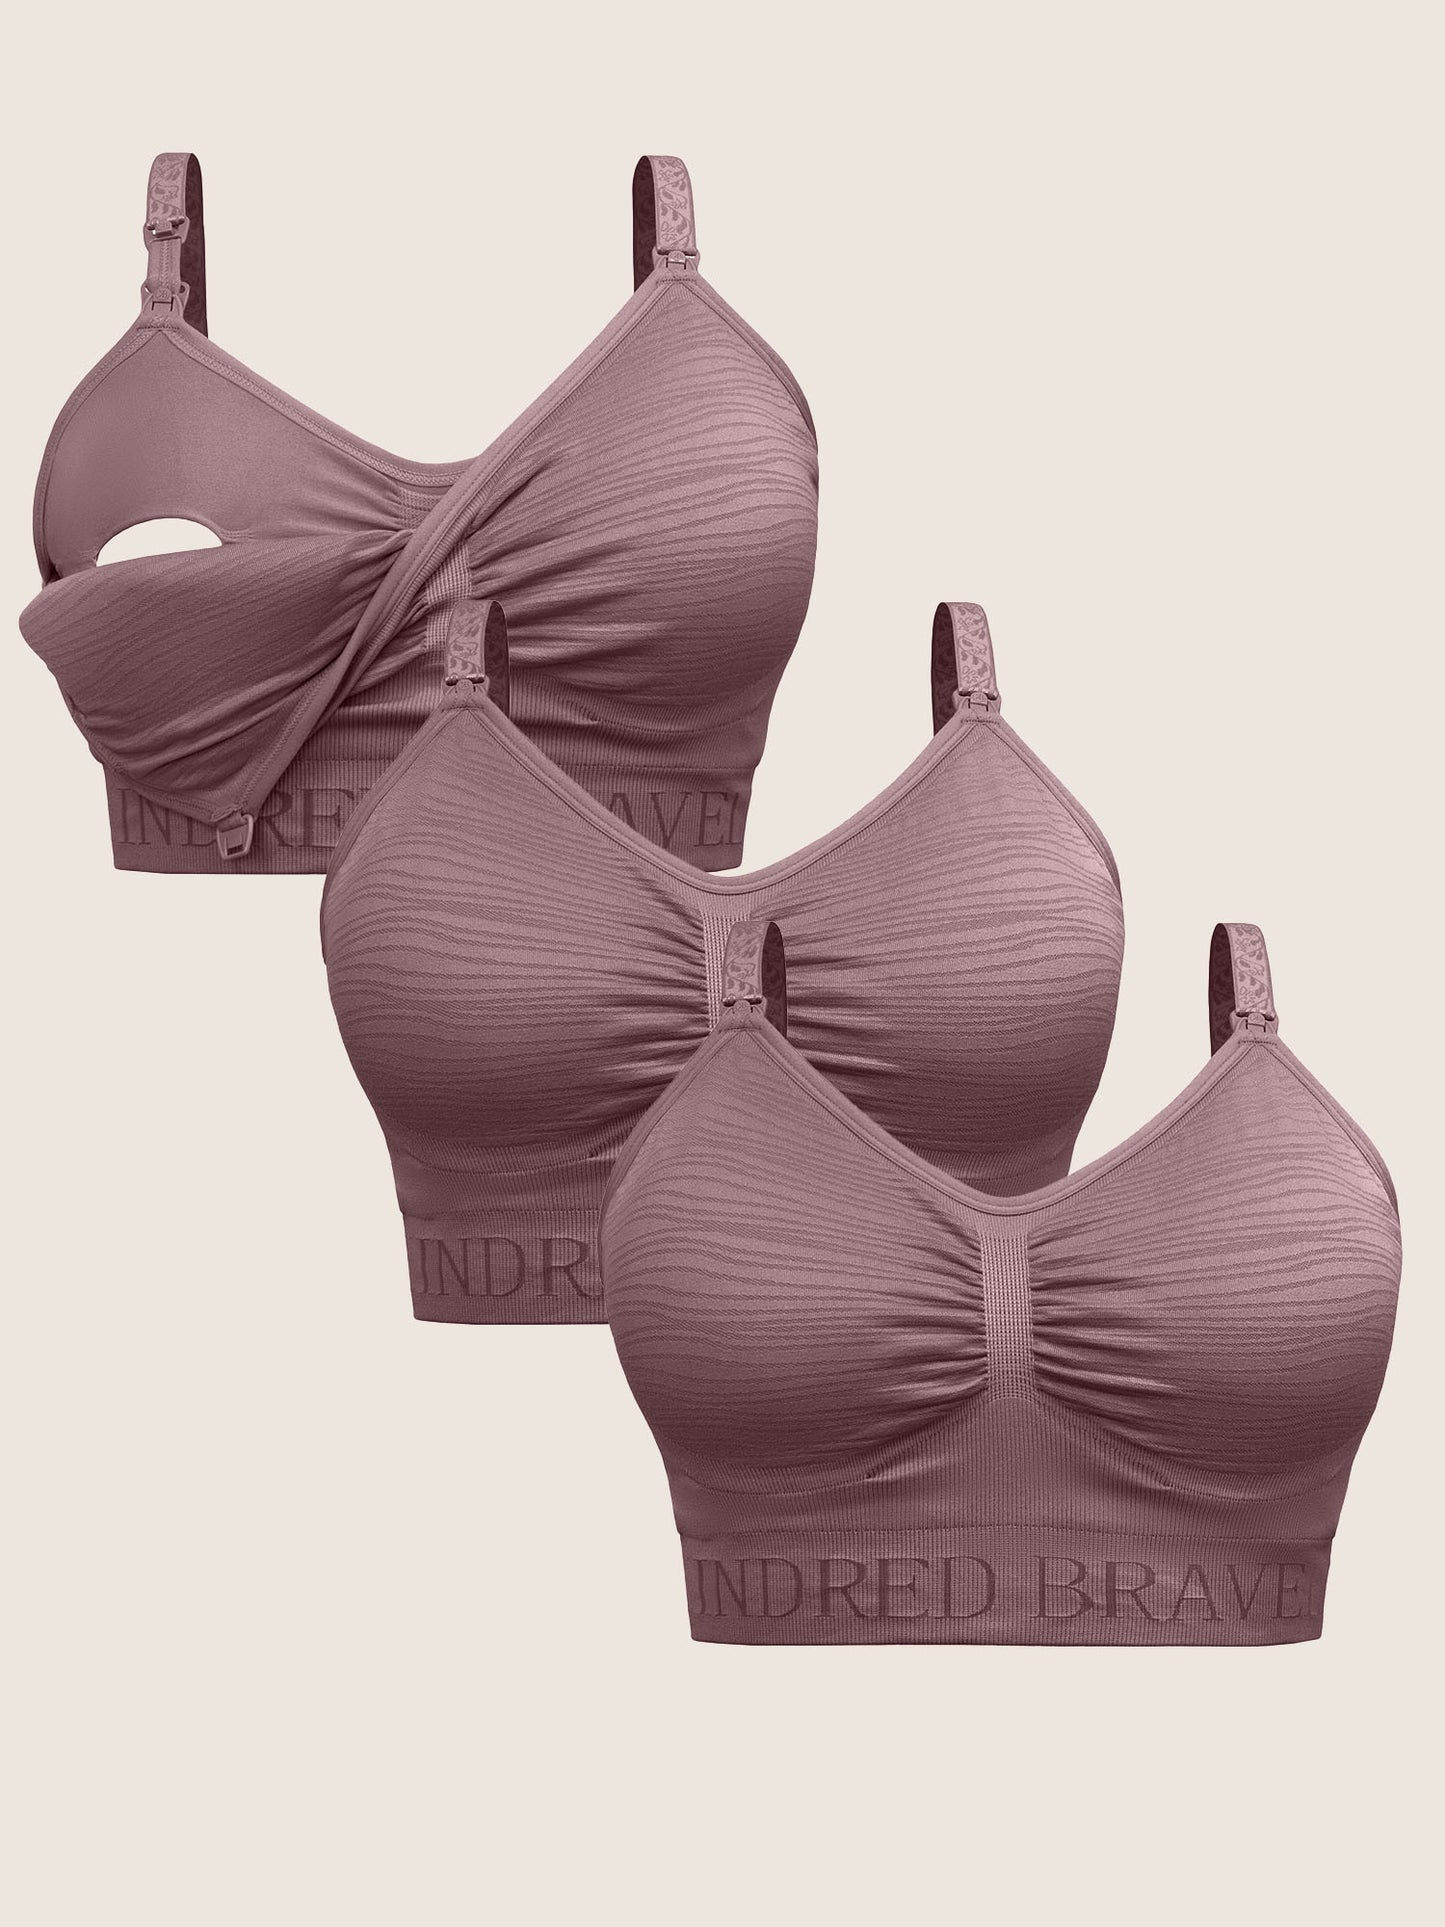 A Wash Wear Spare® Pumping Bra Pack in Twilight showing three  Sublime® Hands-Free Pumping & Nursing Bras in twilight against a beige background